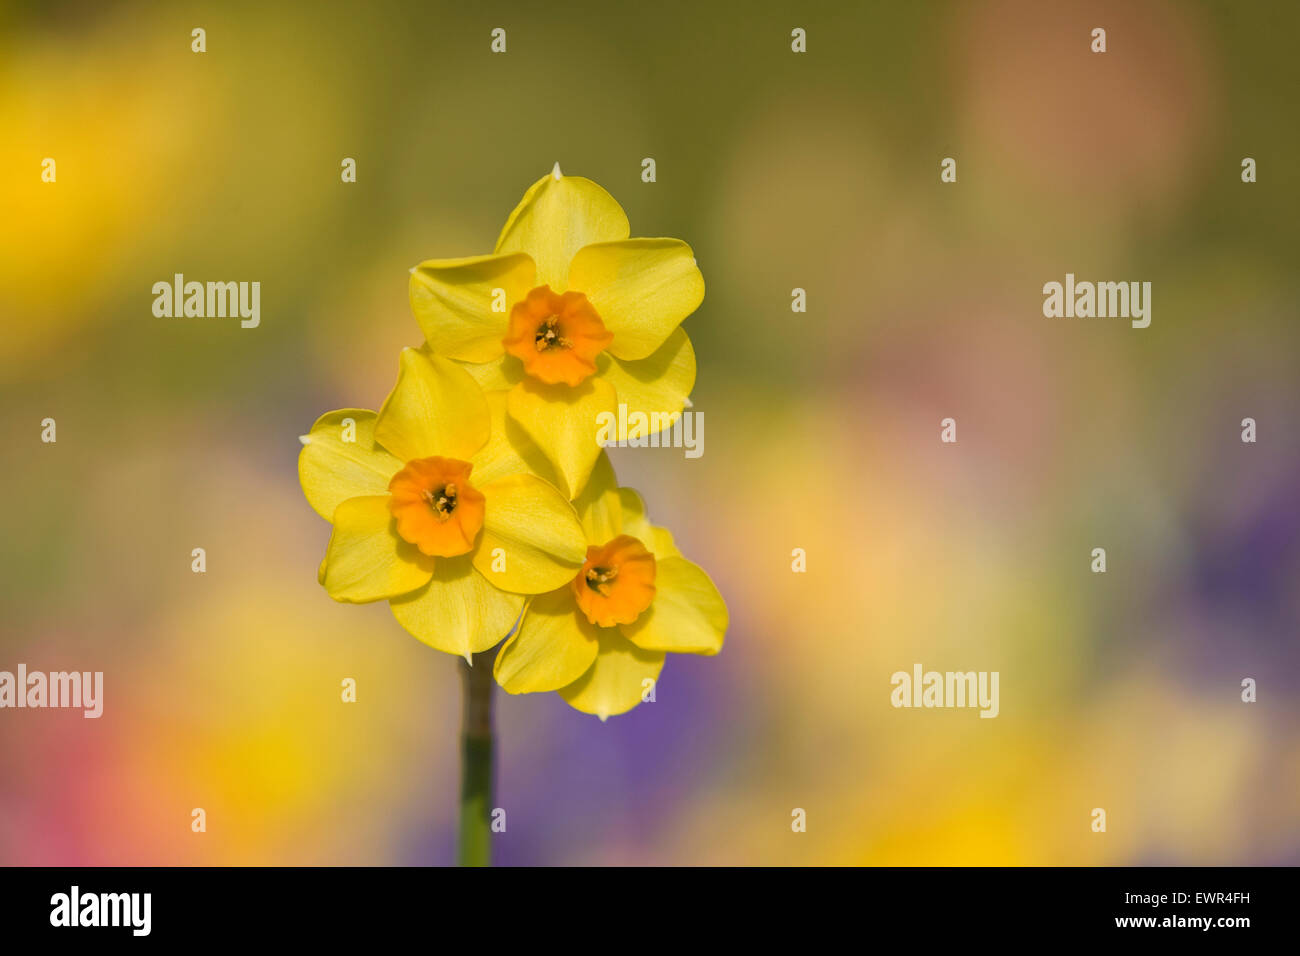 Close up of daffodils lit by soft springtime sunshine, background out of focus. Photo taken in the garden of Shrewsbury Castle, Shropshire. 2015. Stock Photo